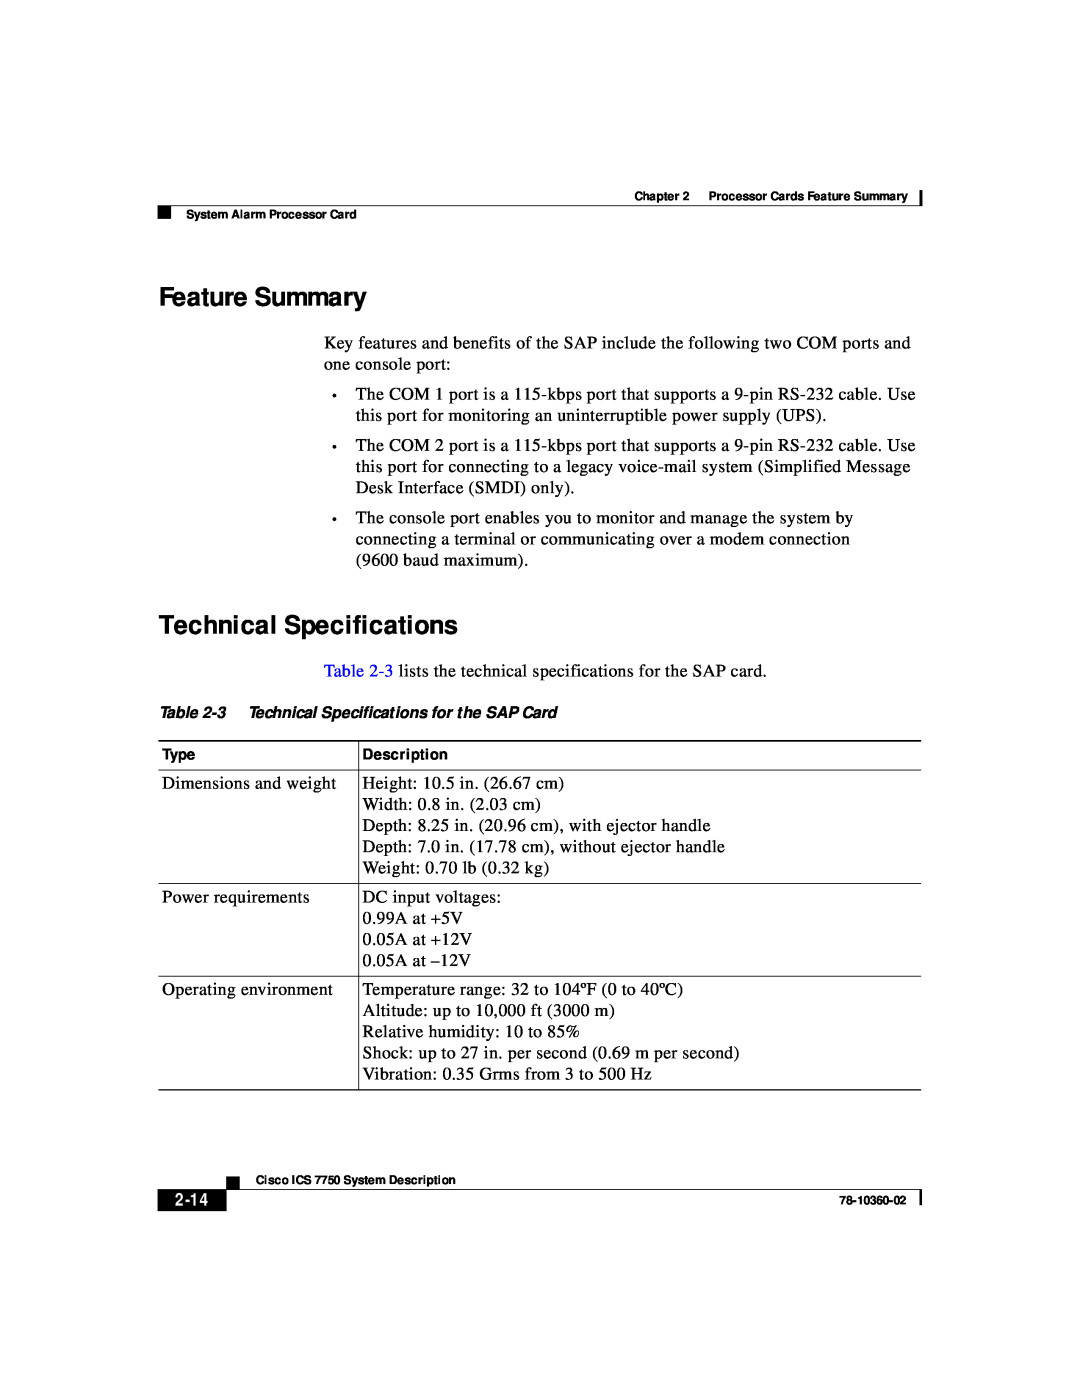 Cisco Systems ICS-7750 manual Feature Summary, 2-14, 3 Technical Specifications for the SAP Card 